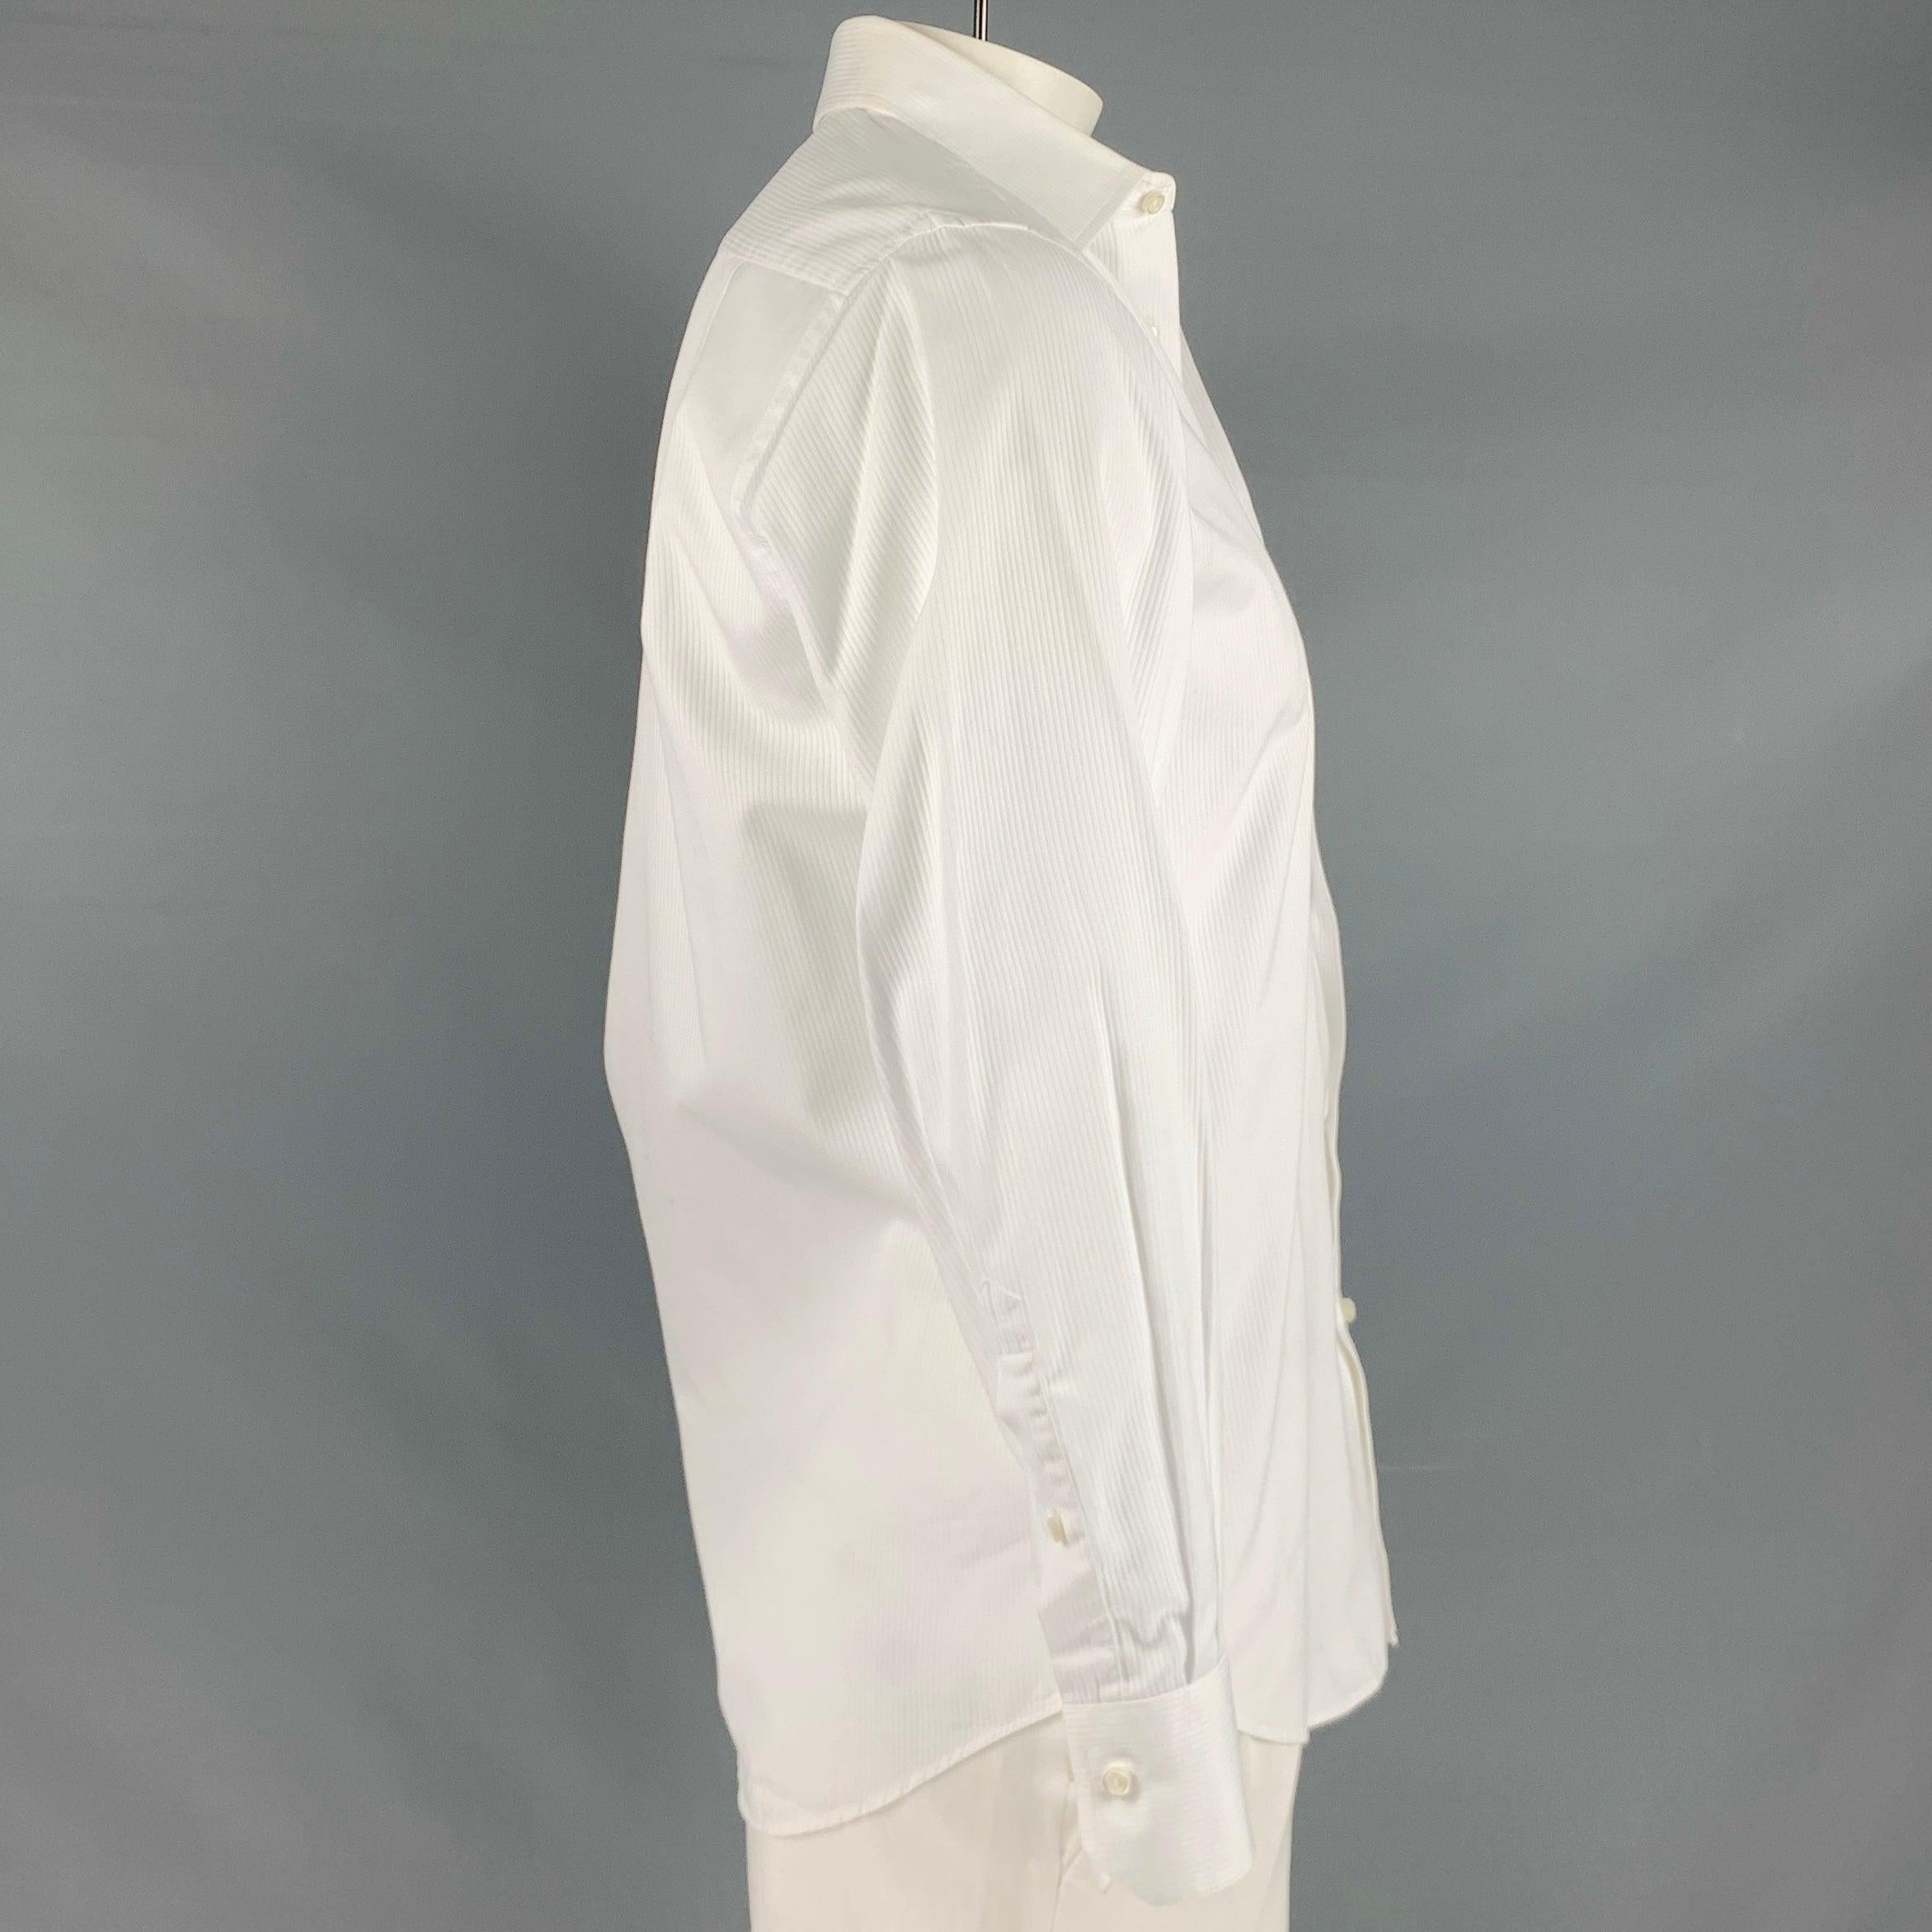 HUGO BOSS long sleeve tuxedo shirt in a white cotton fabric featuring vertical stripe pattern, one pocket, and button closure. Very Good Pre-Owned Condition. Minor marks. 

Marked:   15 / 32/33 

Measurements: 
 
Shoulder: 16.5 inches Chest: 44